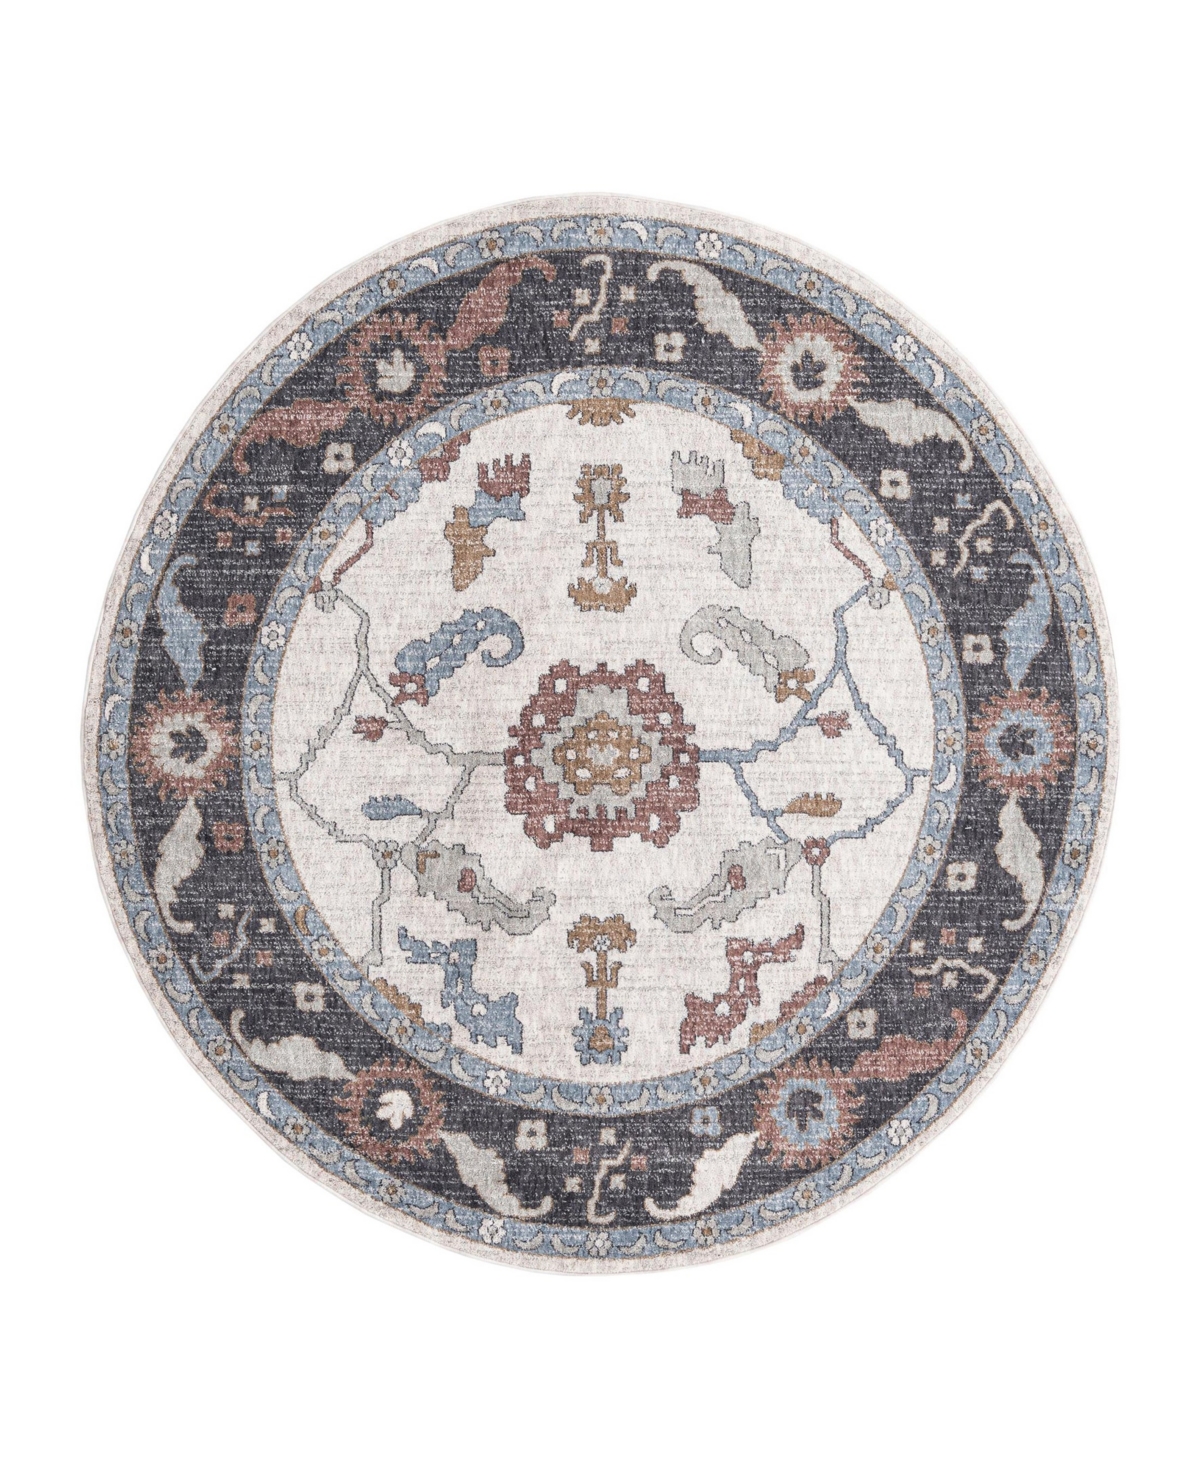 Bayshore Home Venerable Ven03 7' X 7' Round Area Rug In Ivory